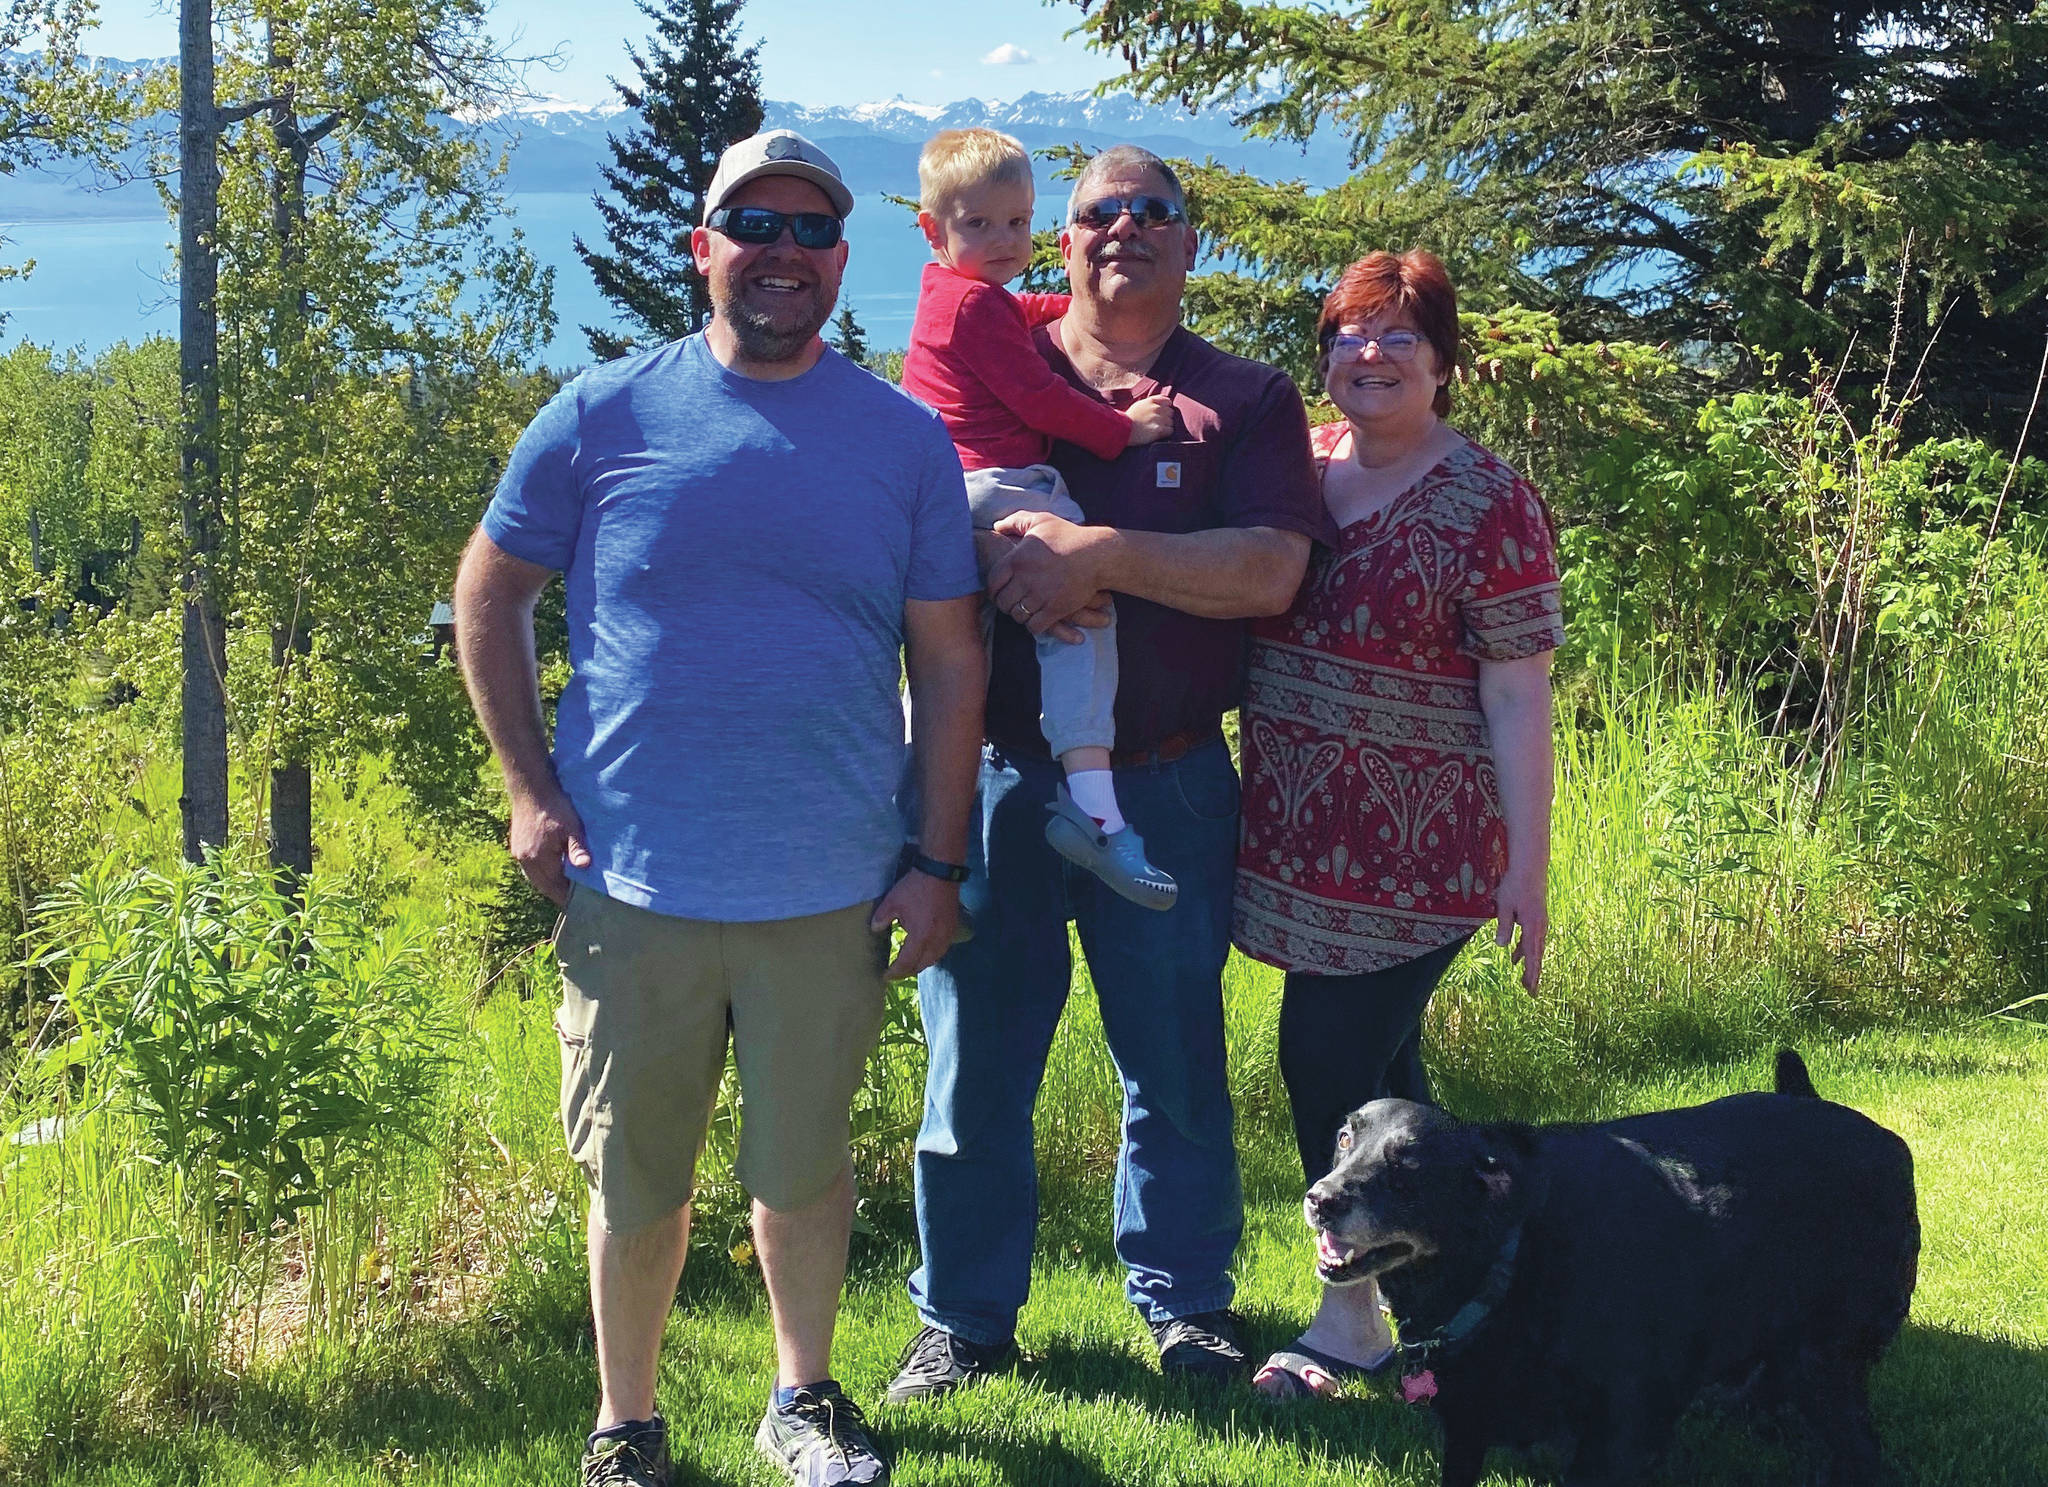 The Robl men pose with Teri Robl for a photo on Sunday, June 14, 2020, in Homer, Alaska. From left to right are Dave Robl, Kase Robl, “Papa” Mark Robl and “Nani” Teri Robl. (Photo by Matt Eberhardt)